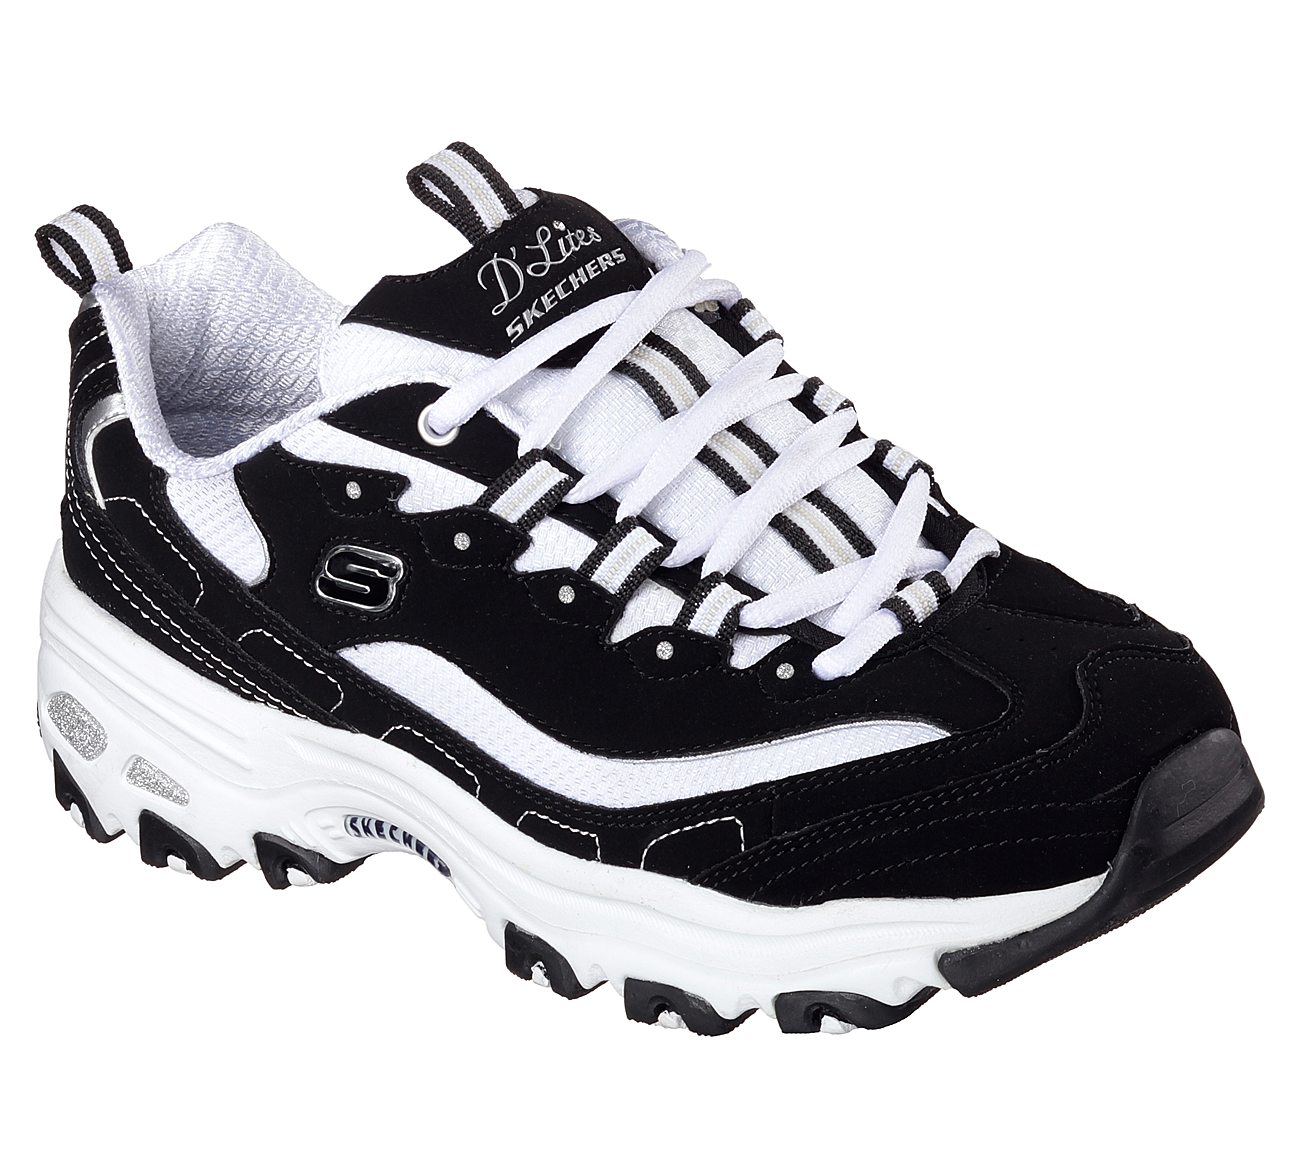 Future Group exits its joint venture with Sketchers, sells 49% stake it ...